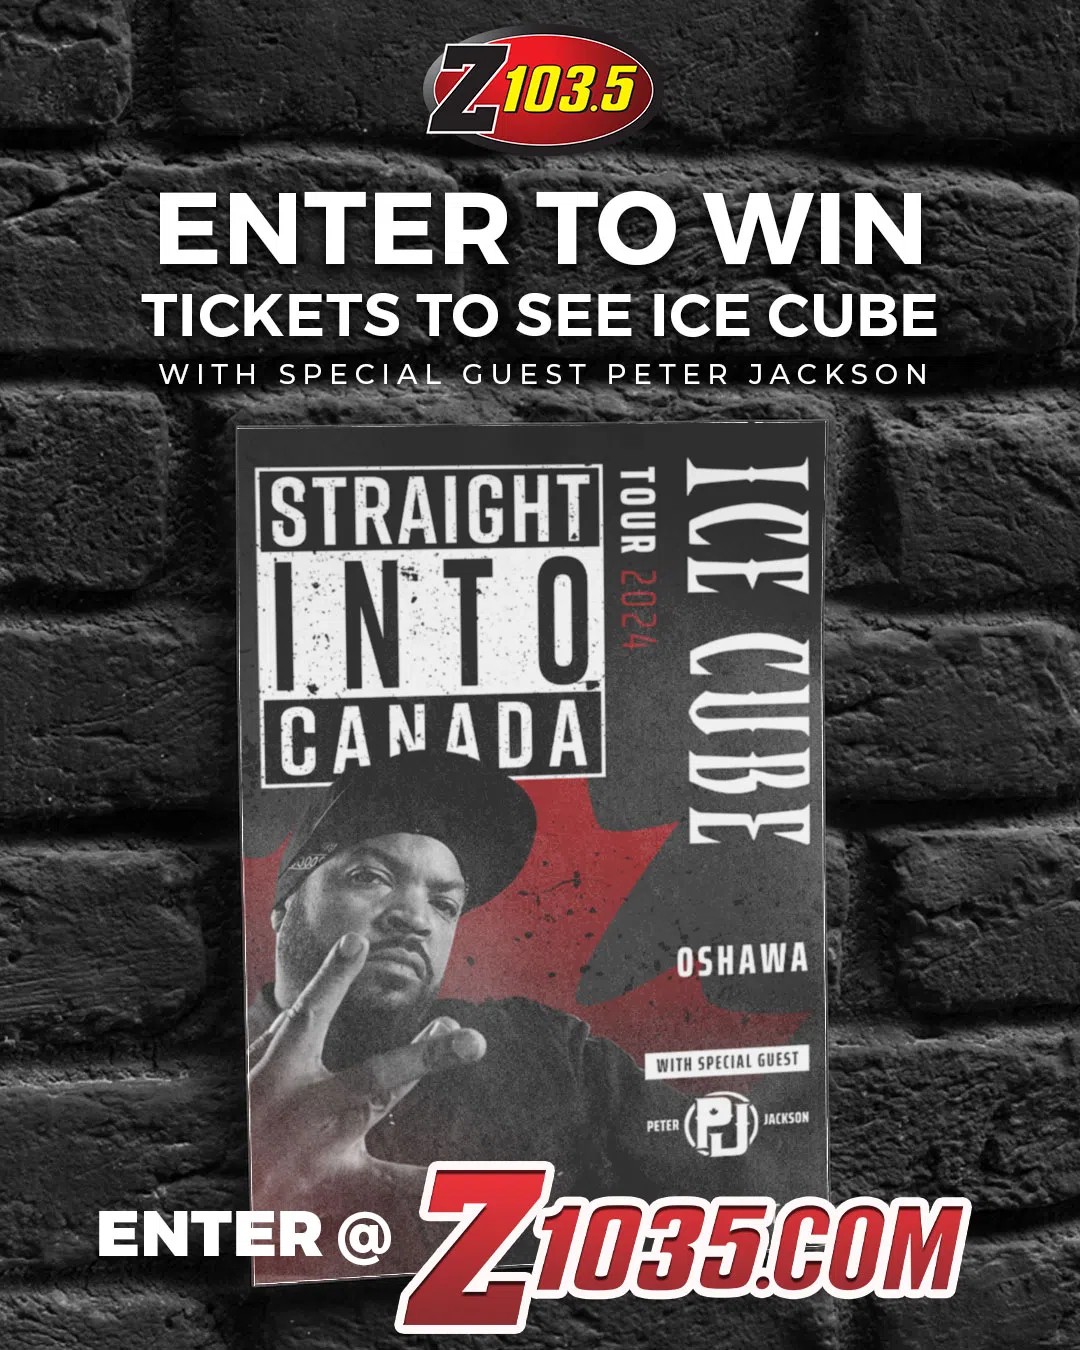 Feature: https://z1035.com/win/enter-to-win-a-pair-of-tickets-to-see-ice-cube/